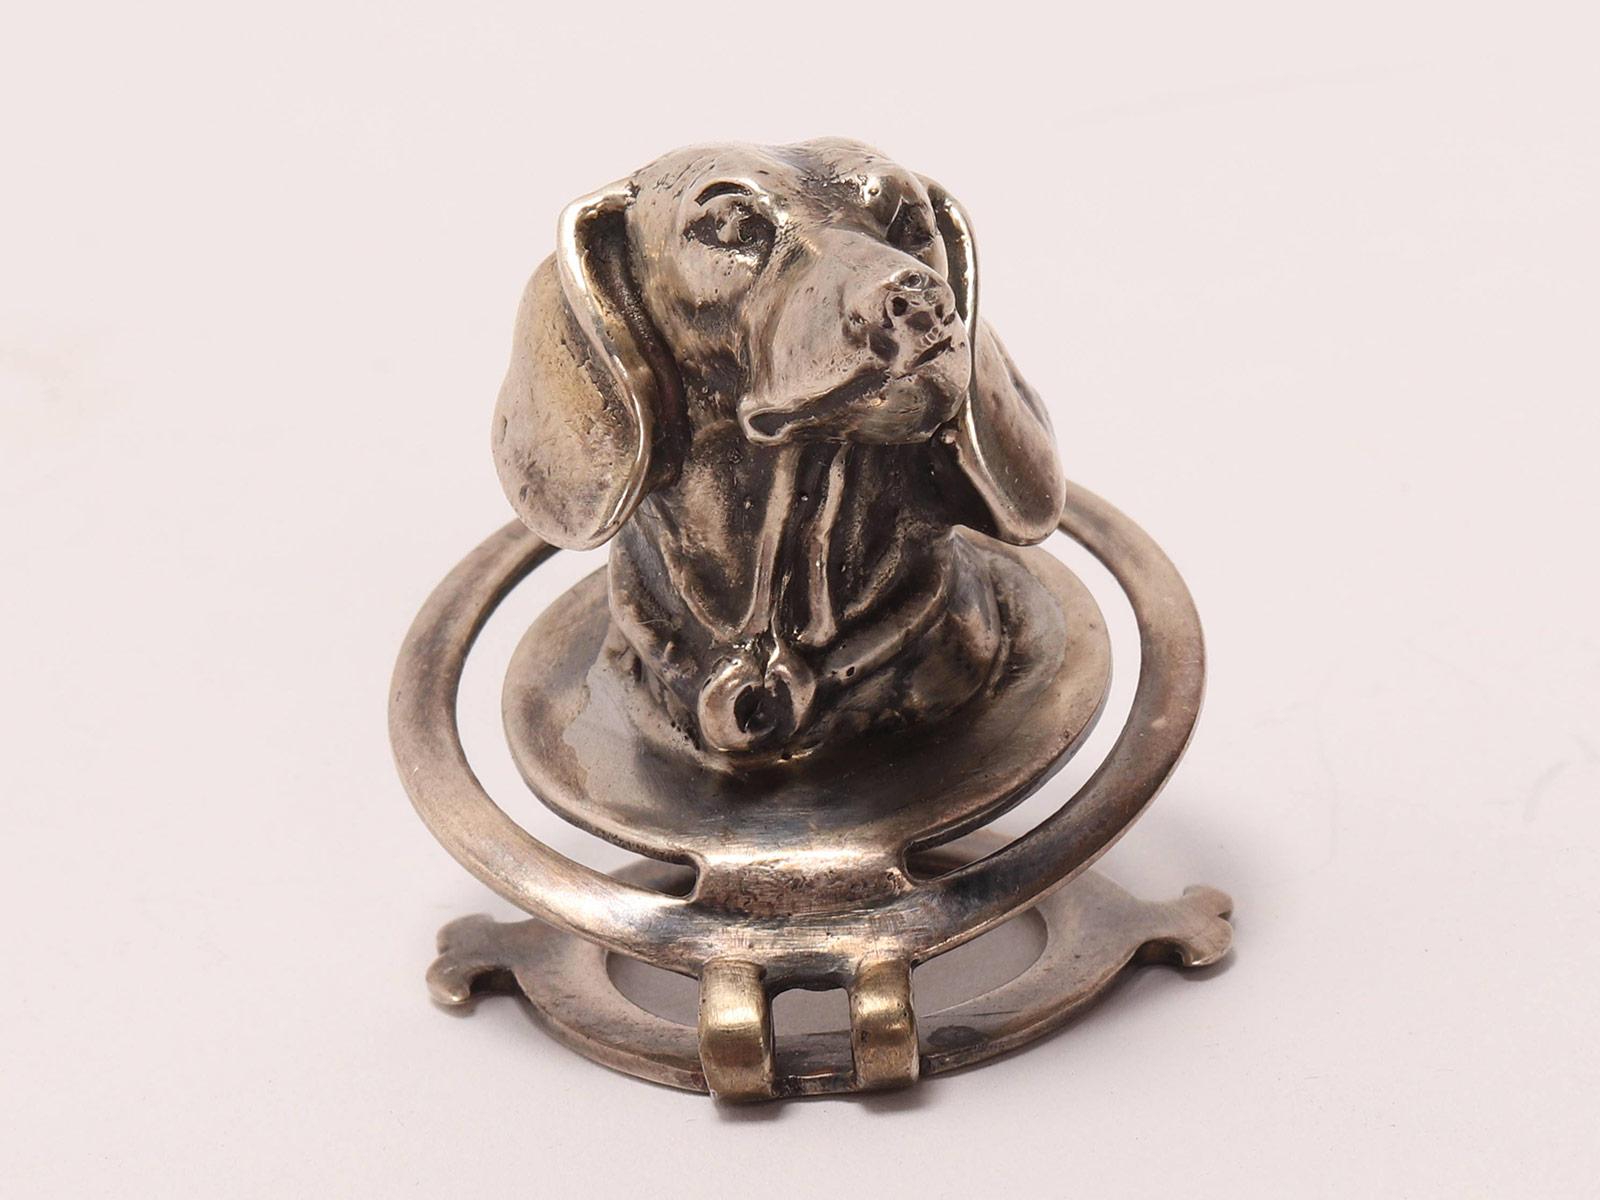 Set of 6 sterling silver 925/1000 placeholders, depicting a dachshund’s head. Signed Cartier, America, 1930 ca.